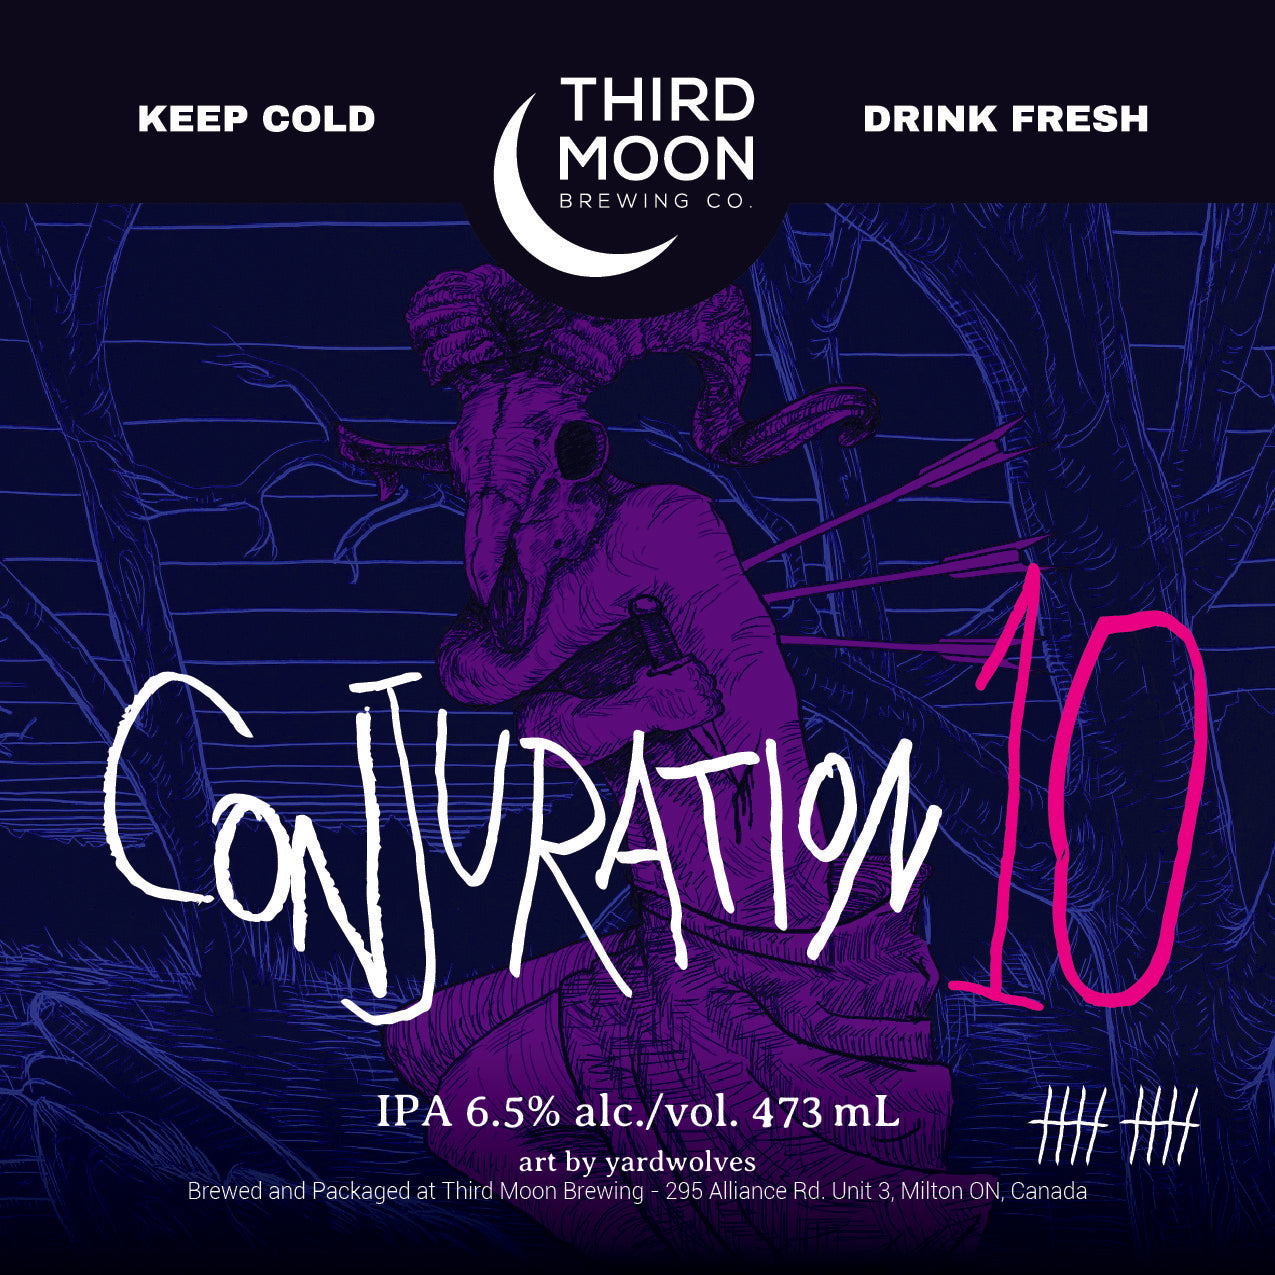 IPA - 4-pk of "Conjuration 10" tall cans